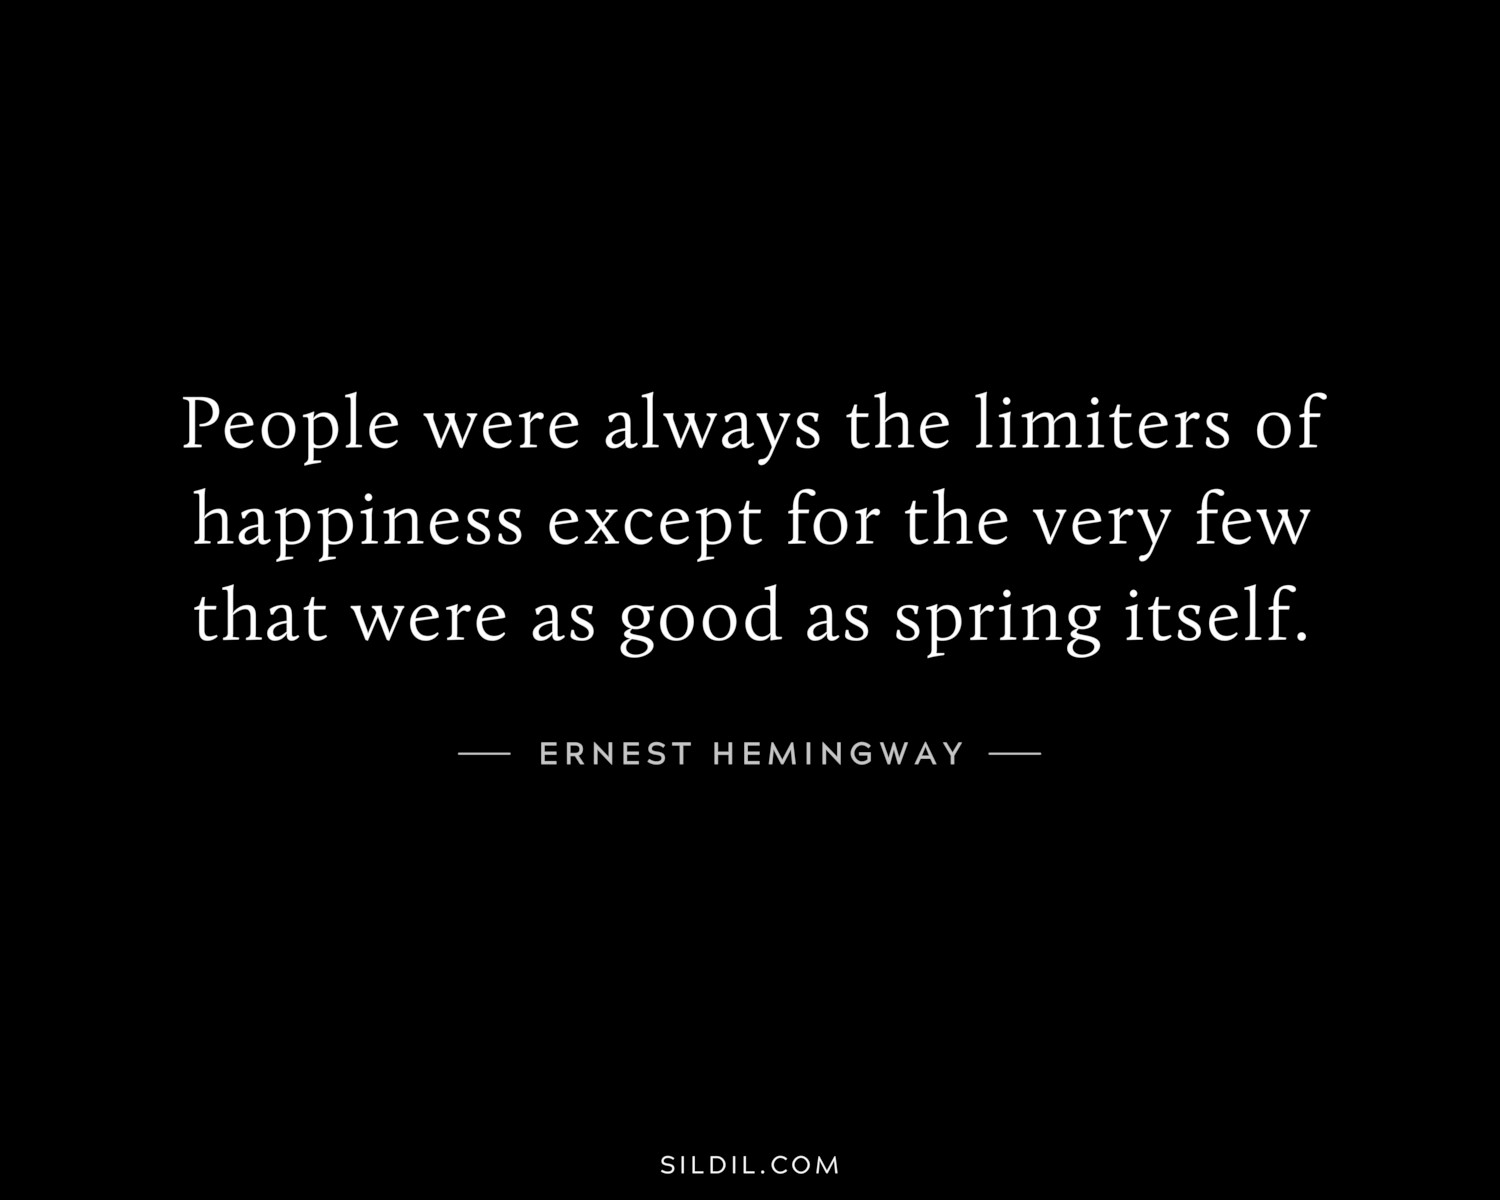 People were always the limiters of happiness except for the very few that were as good as spring itself.